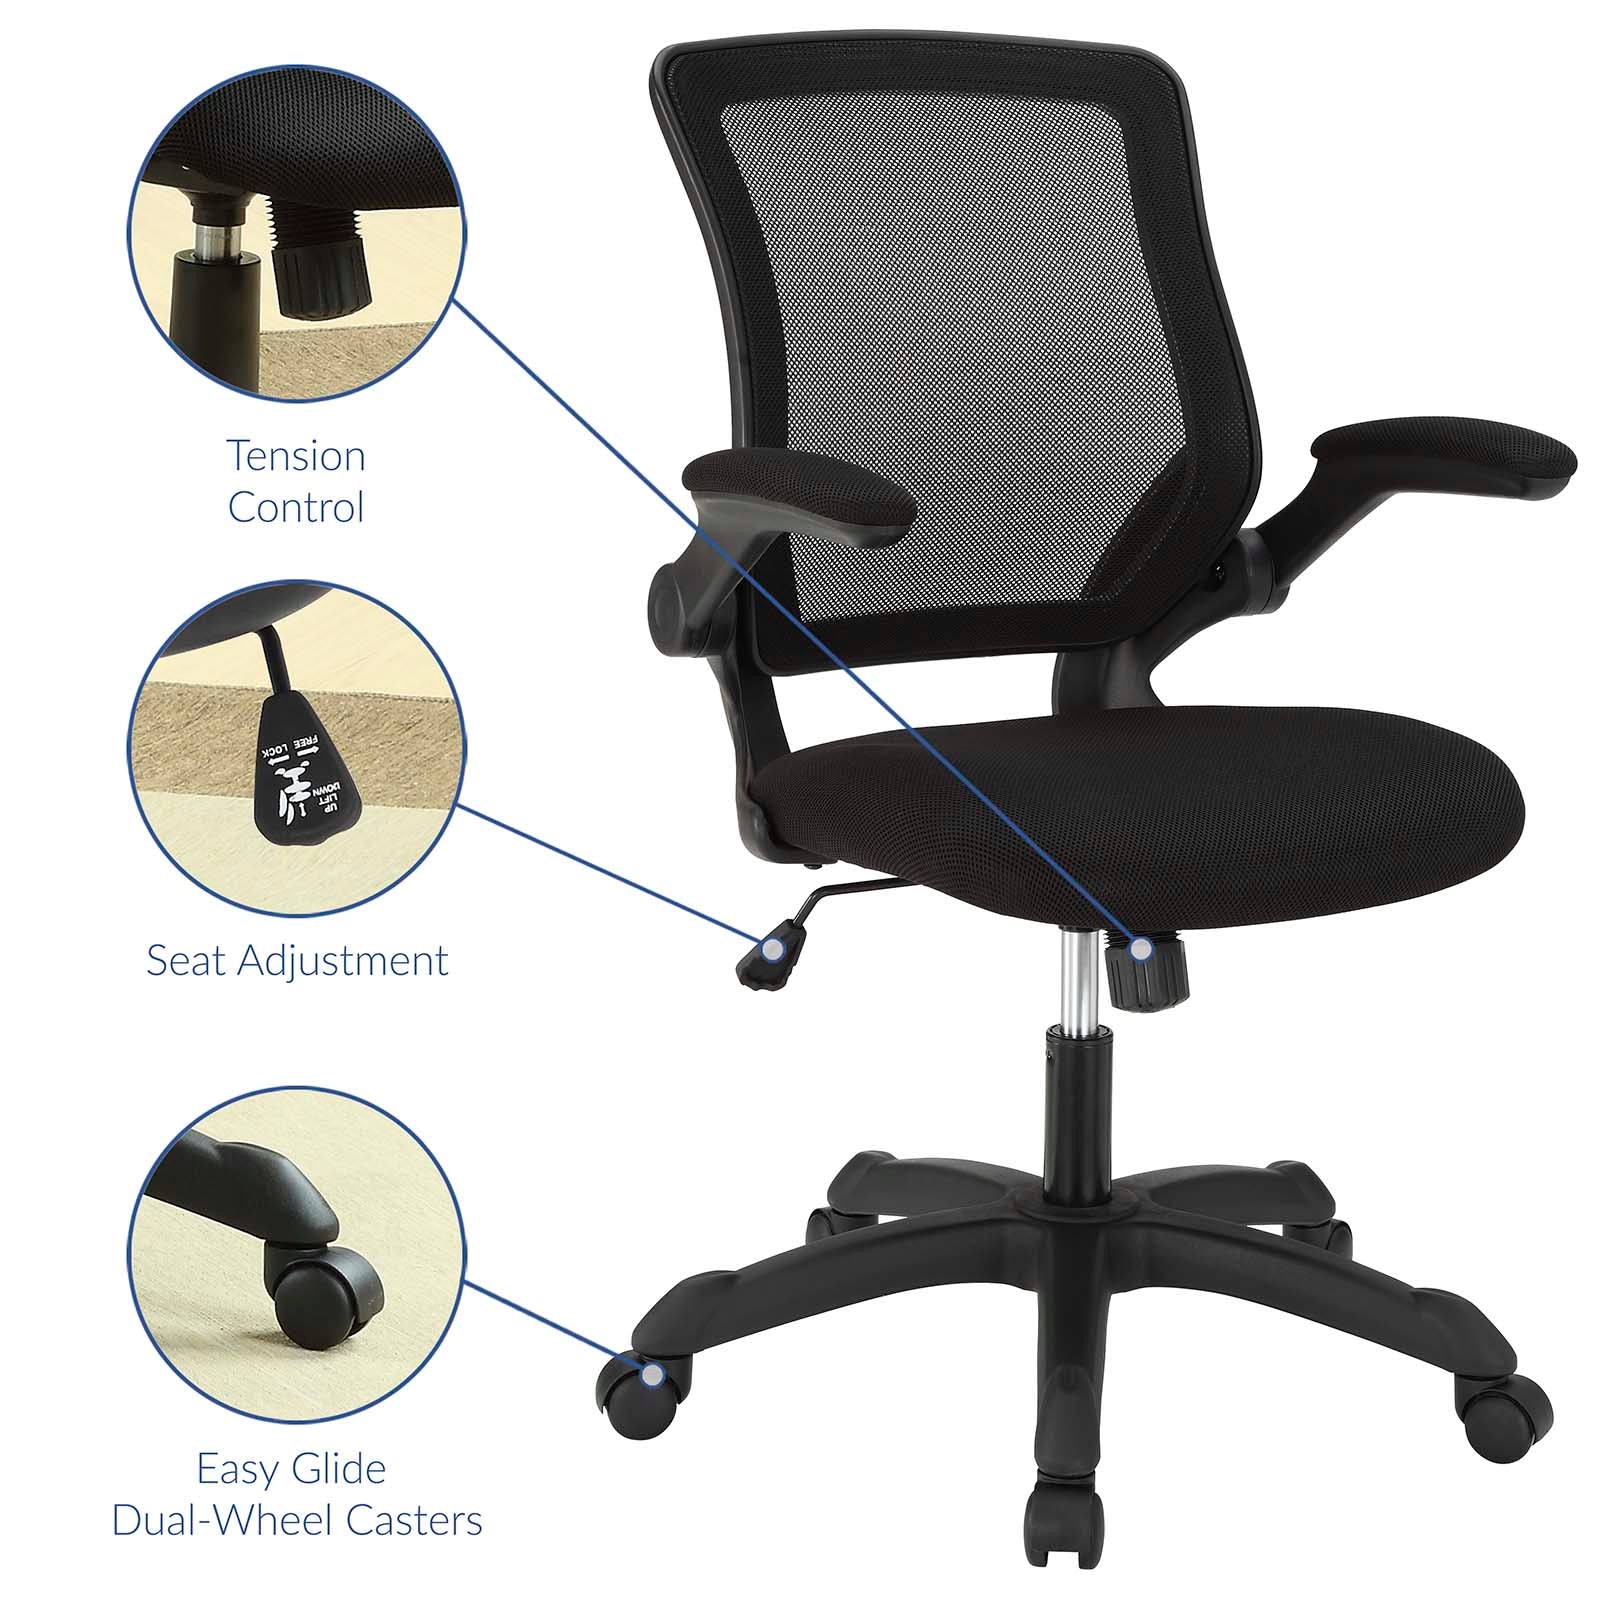 Modway Task Chairs - Veer Mesh Office Chair Black